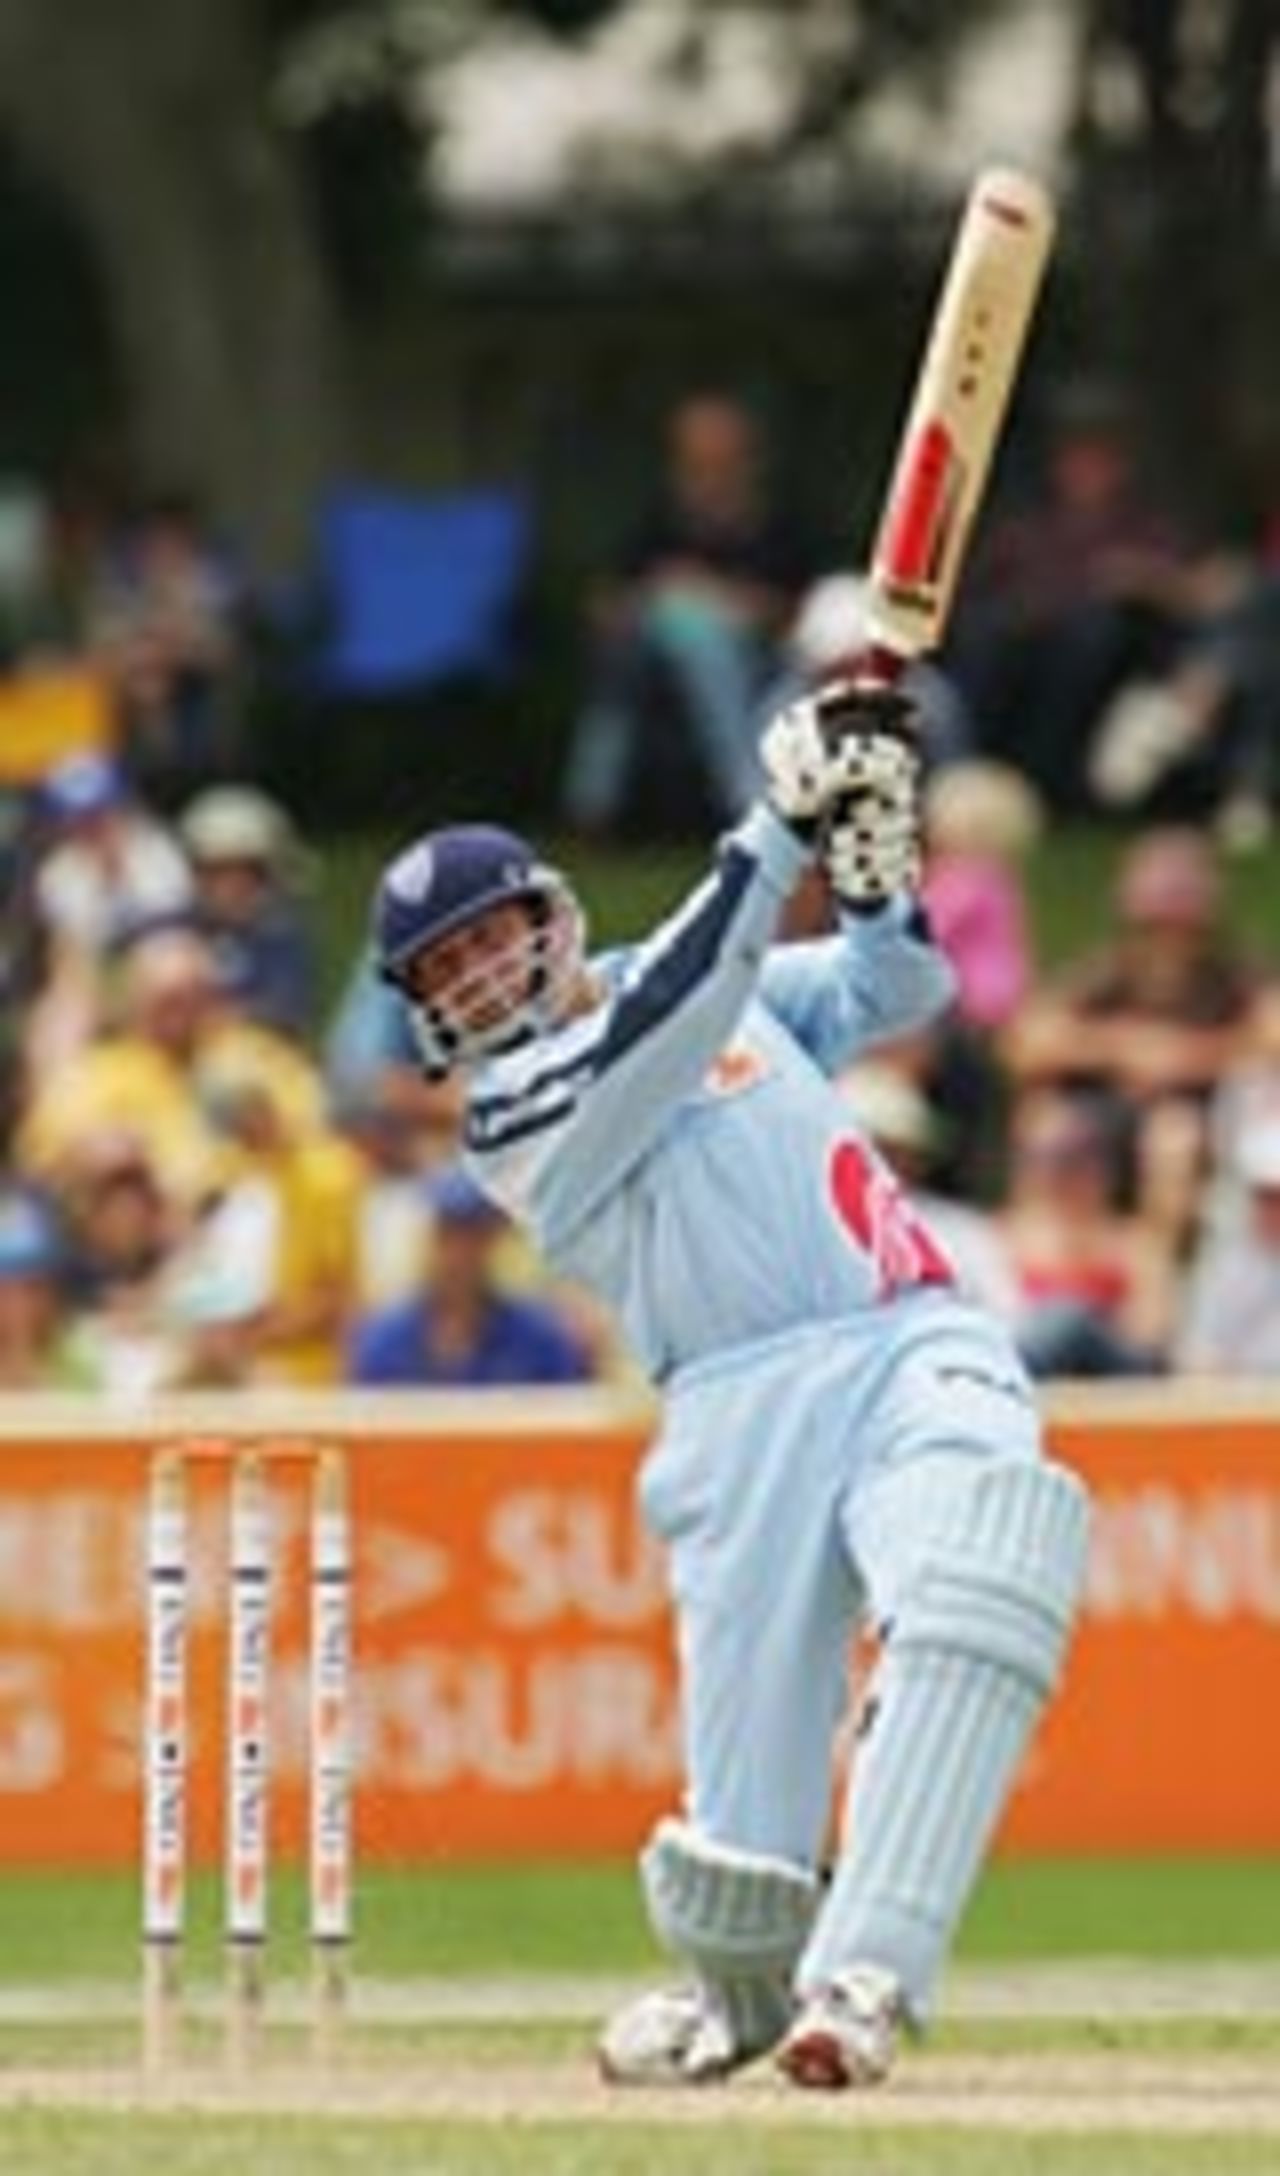 Shawn Bradstreet in action for NSW Blues v Tigers, October 2004